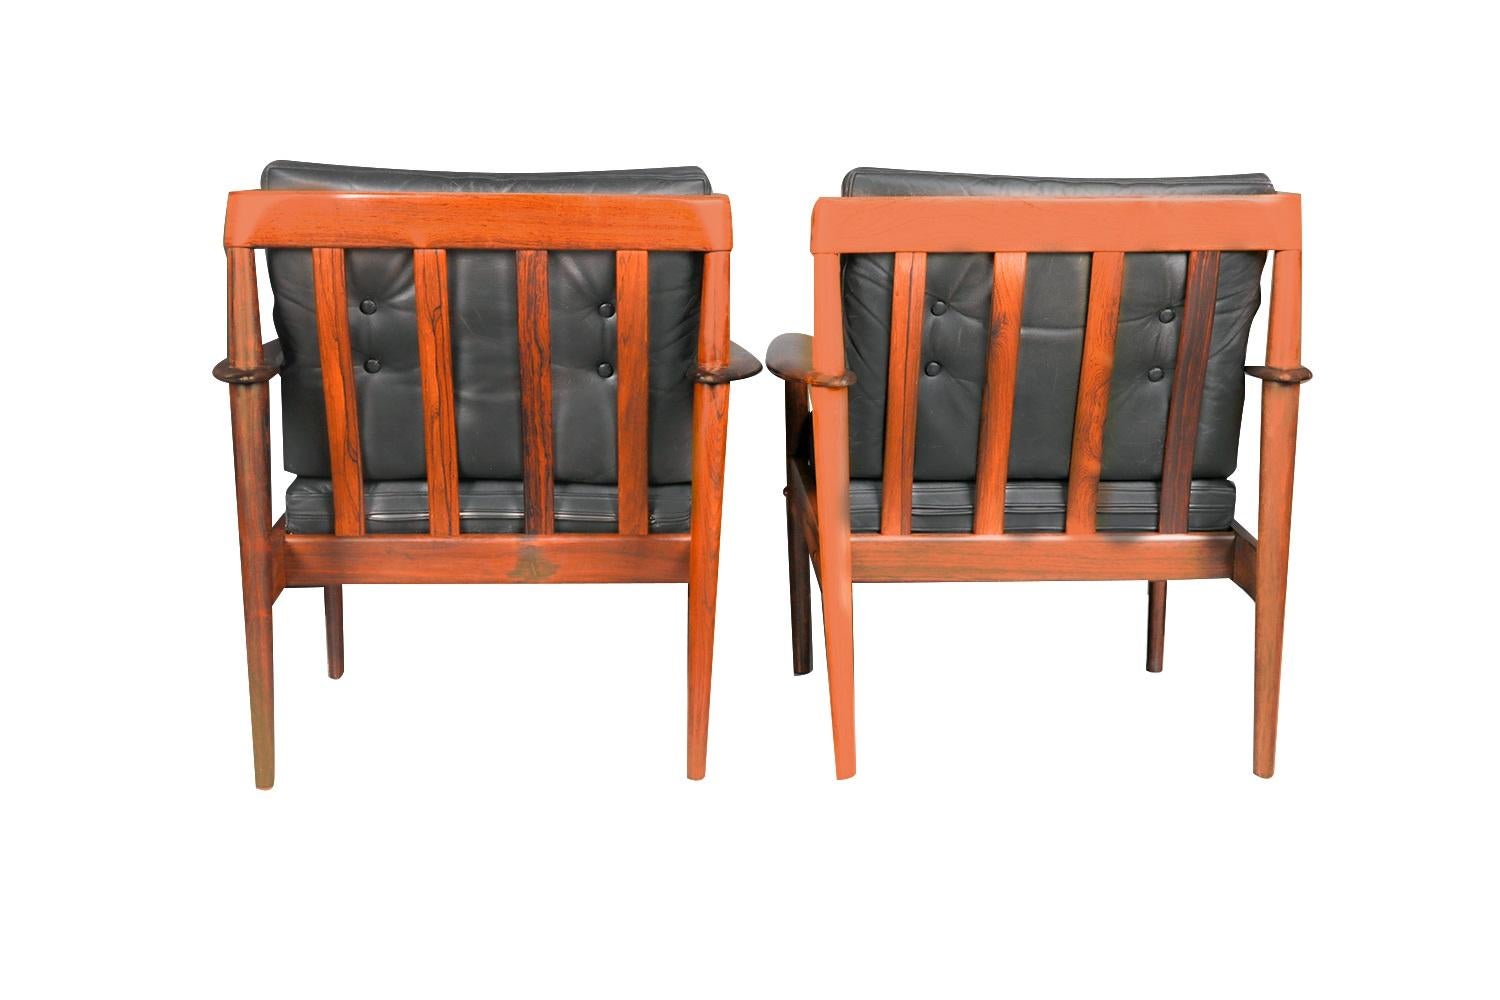 A stunning, rare pair of Mid-Century Modern Grete Jalk lounge chairs, Mod. PJ (Poul Jeppesen) (Model 56) 1960's rosewood, lounge arm chairs designed by Grete Jalk for Poul Jeppesen made in Denmark. An exceptional pair, both for their form and